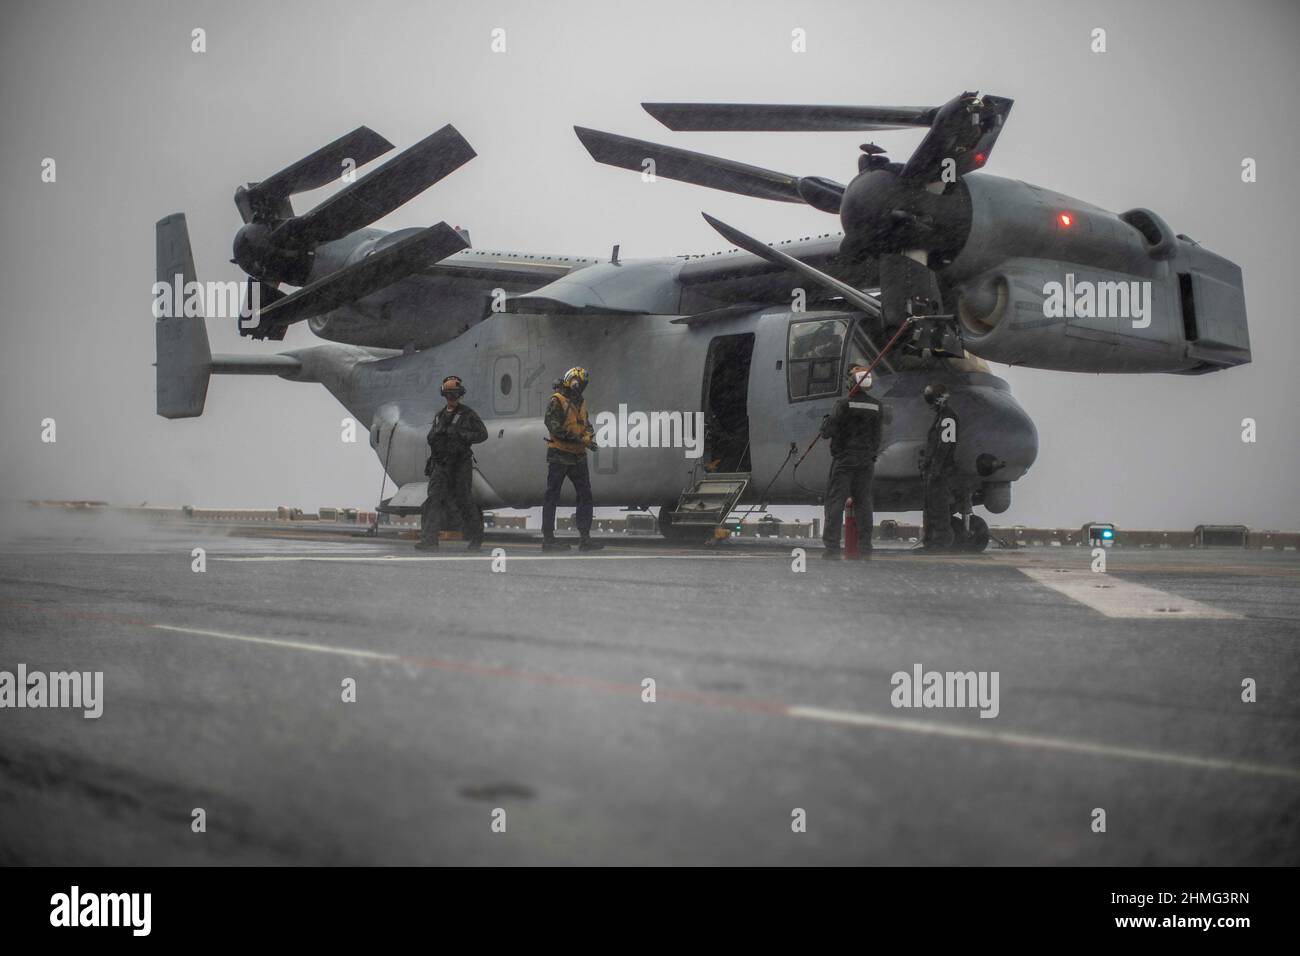 PHILIPPINE SEA (Jan. 25, 2022) U.S. Marines assigned to Marine Medium Tiltrotor Squadron (VMM) 165 (Reinforced), 11th Marine Expeditionary Unit (MEU), conduct routine maintenance on an MV-22B Osprey attached to VMM-165 (Rein.), 11th MEU, aboard amphibious assault ship USS Essex (LHD 2), Jan. 25, 2022. The 11th MEU and Essex Amphibious Ready Group are operating in the U.S. 7th Fleet area of operations to enhance interoperability with alliances and partners and serve as a ready response force to ensure maritime security and a free and open Indo-Pacific region.  (U.S. Marine Corps photo by Sgt. I Stock Photo